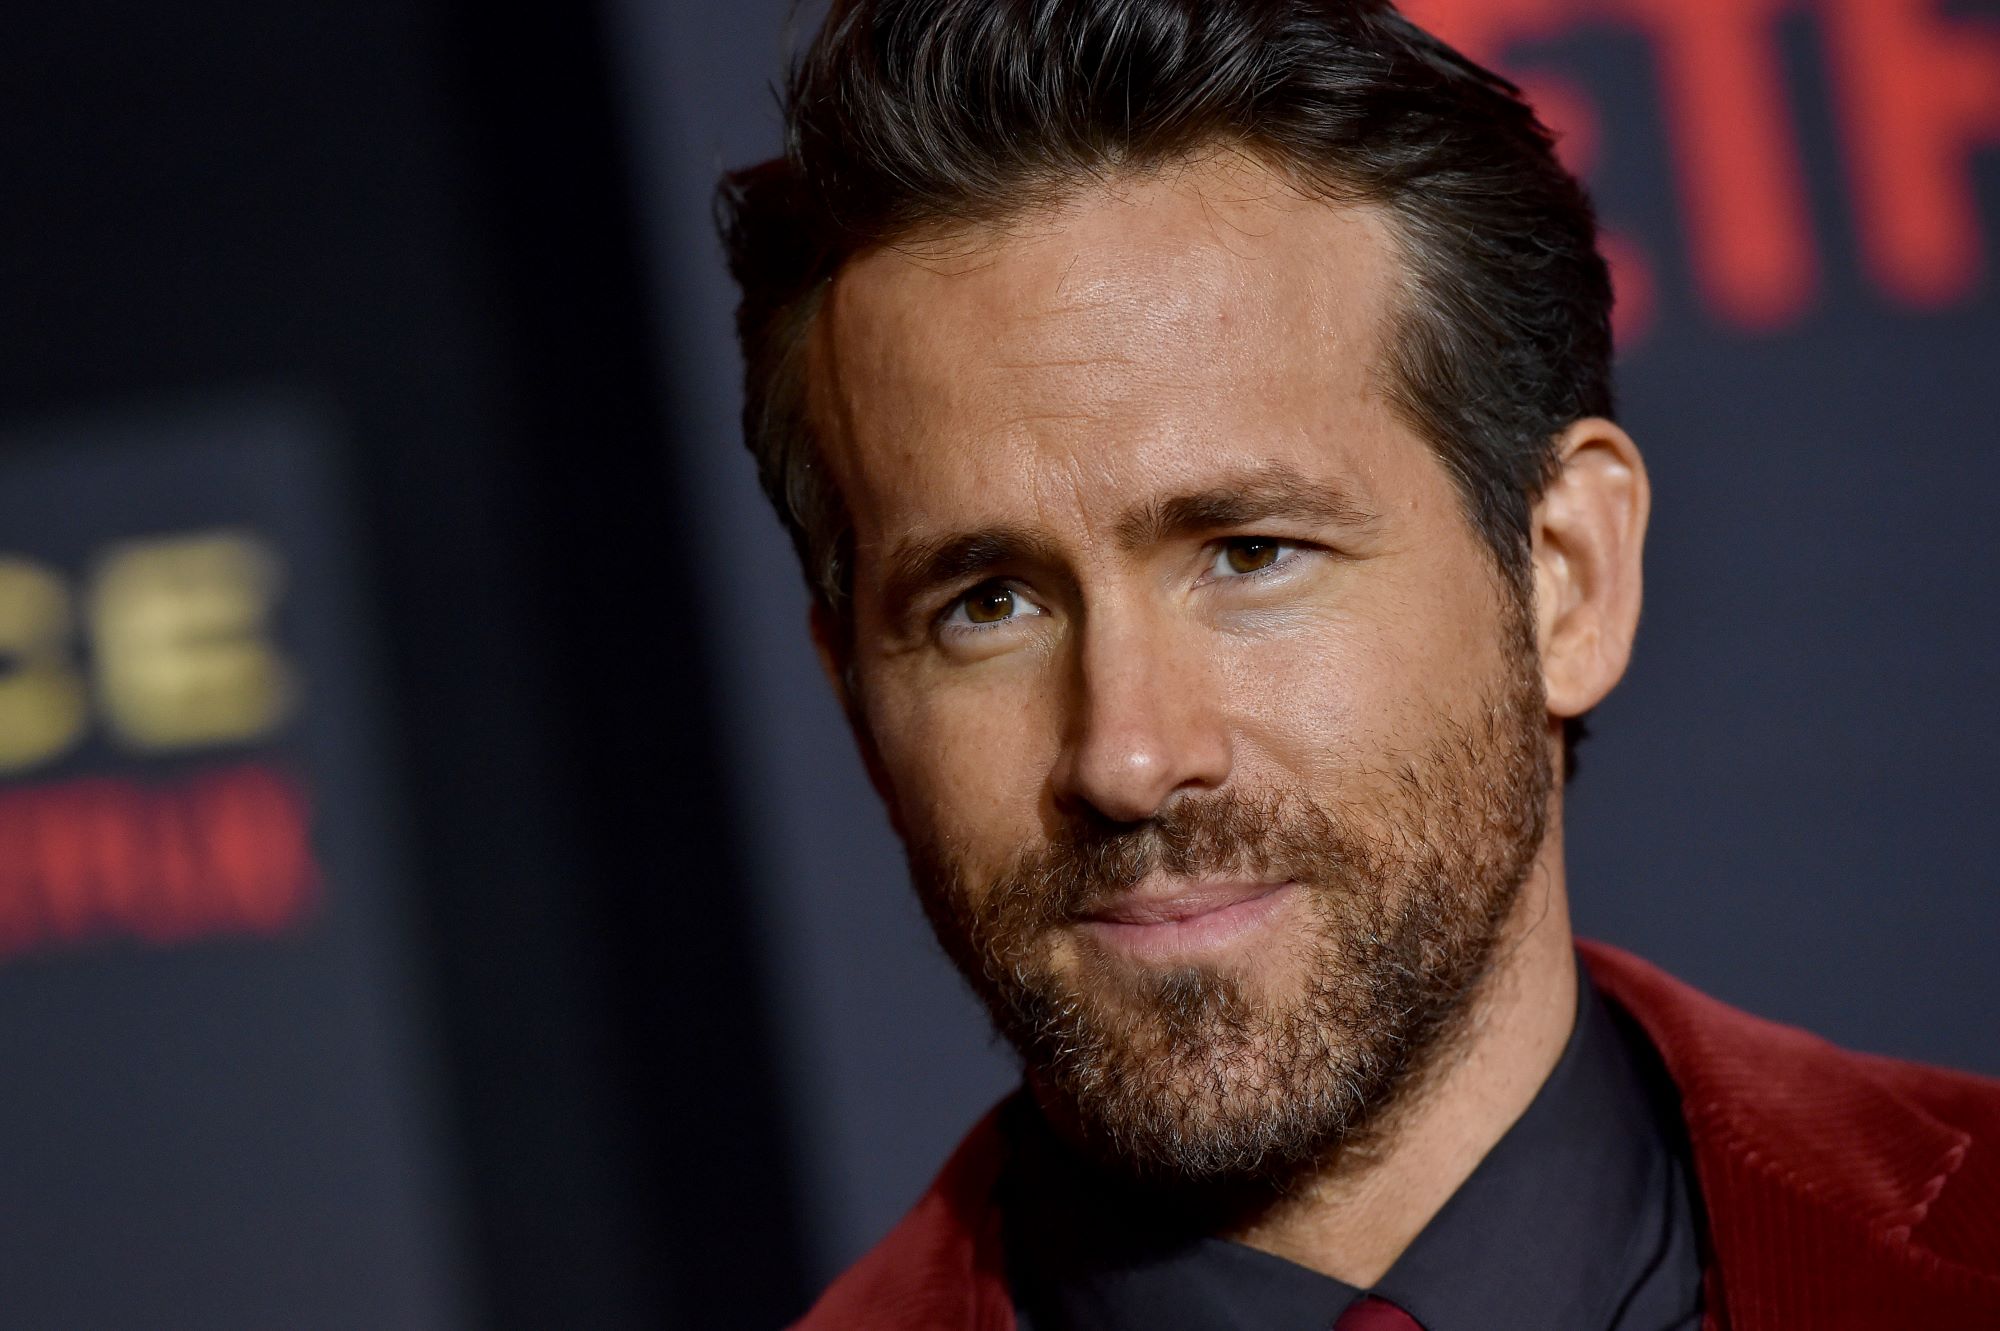 'Deadpool' star Ryan Reynolds, who denies he's in 'Doctor Strange in the Multiverse of Madness,' wears a red suit over